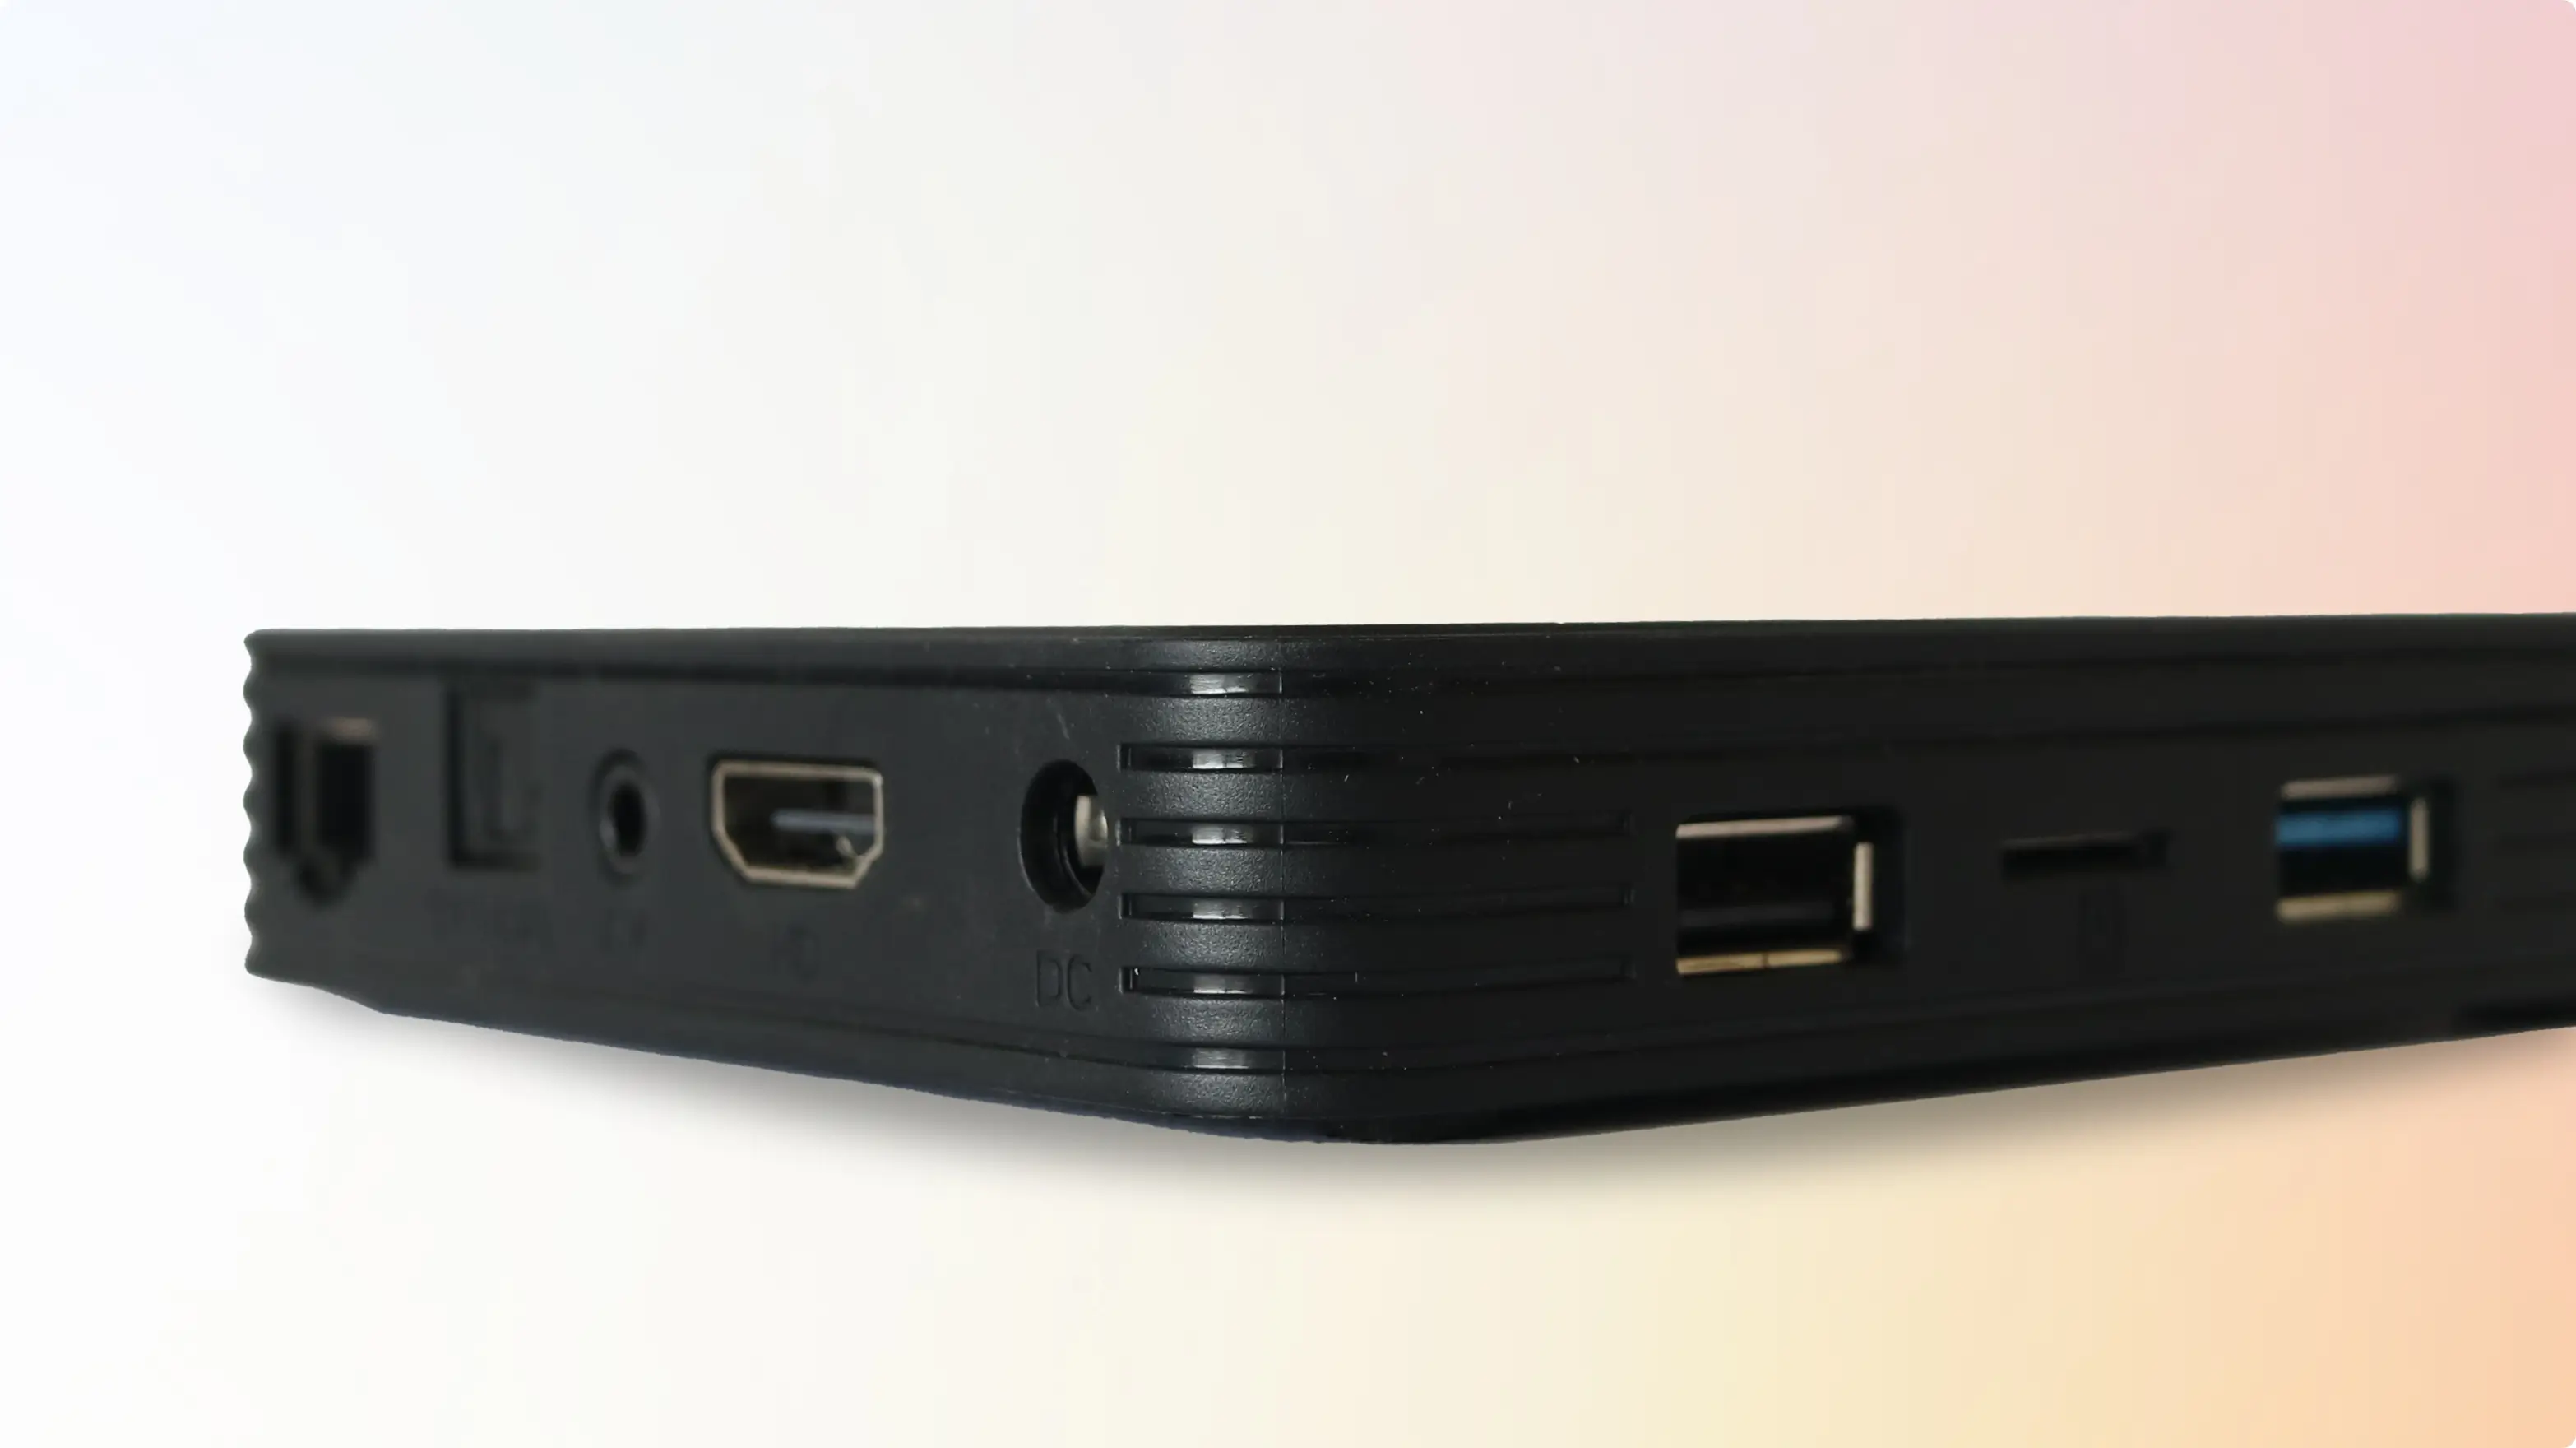 Pickcel Android digital signage media player PX300 with USB, HDMI, Ethernet ports and a slot to connect power adapter.